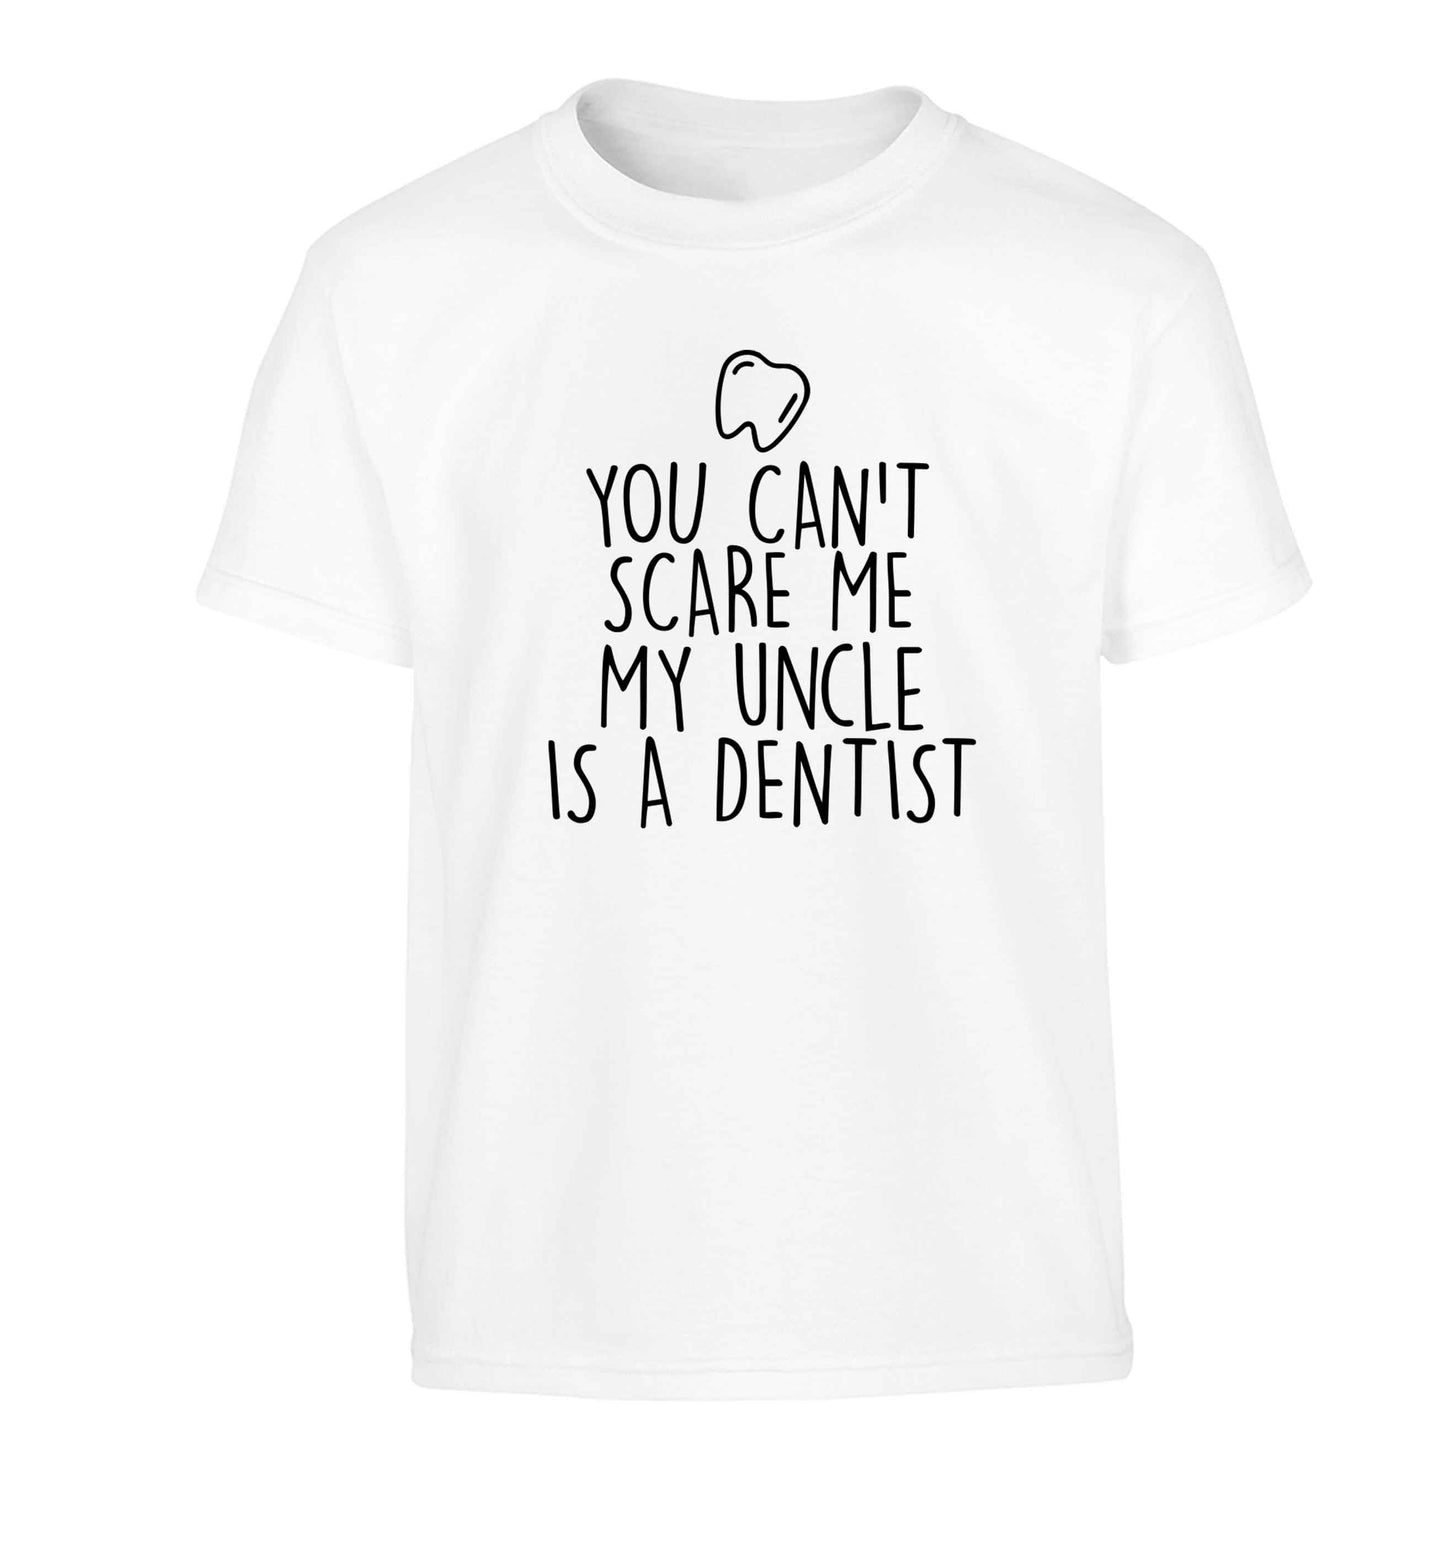 You can't scare me my uncle is a dentist Children's white Tshirt 12-13 Years